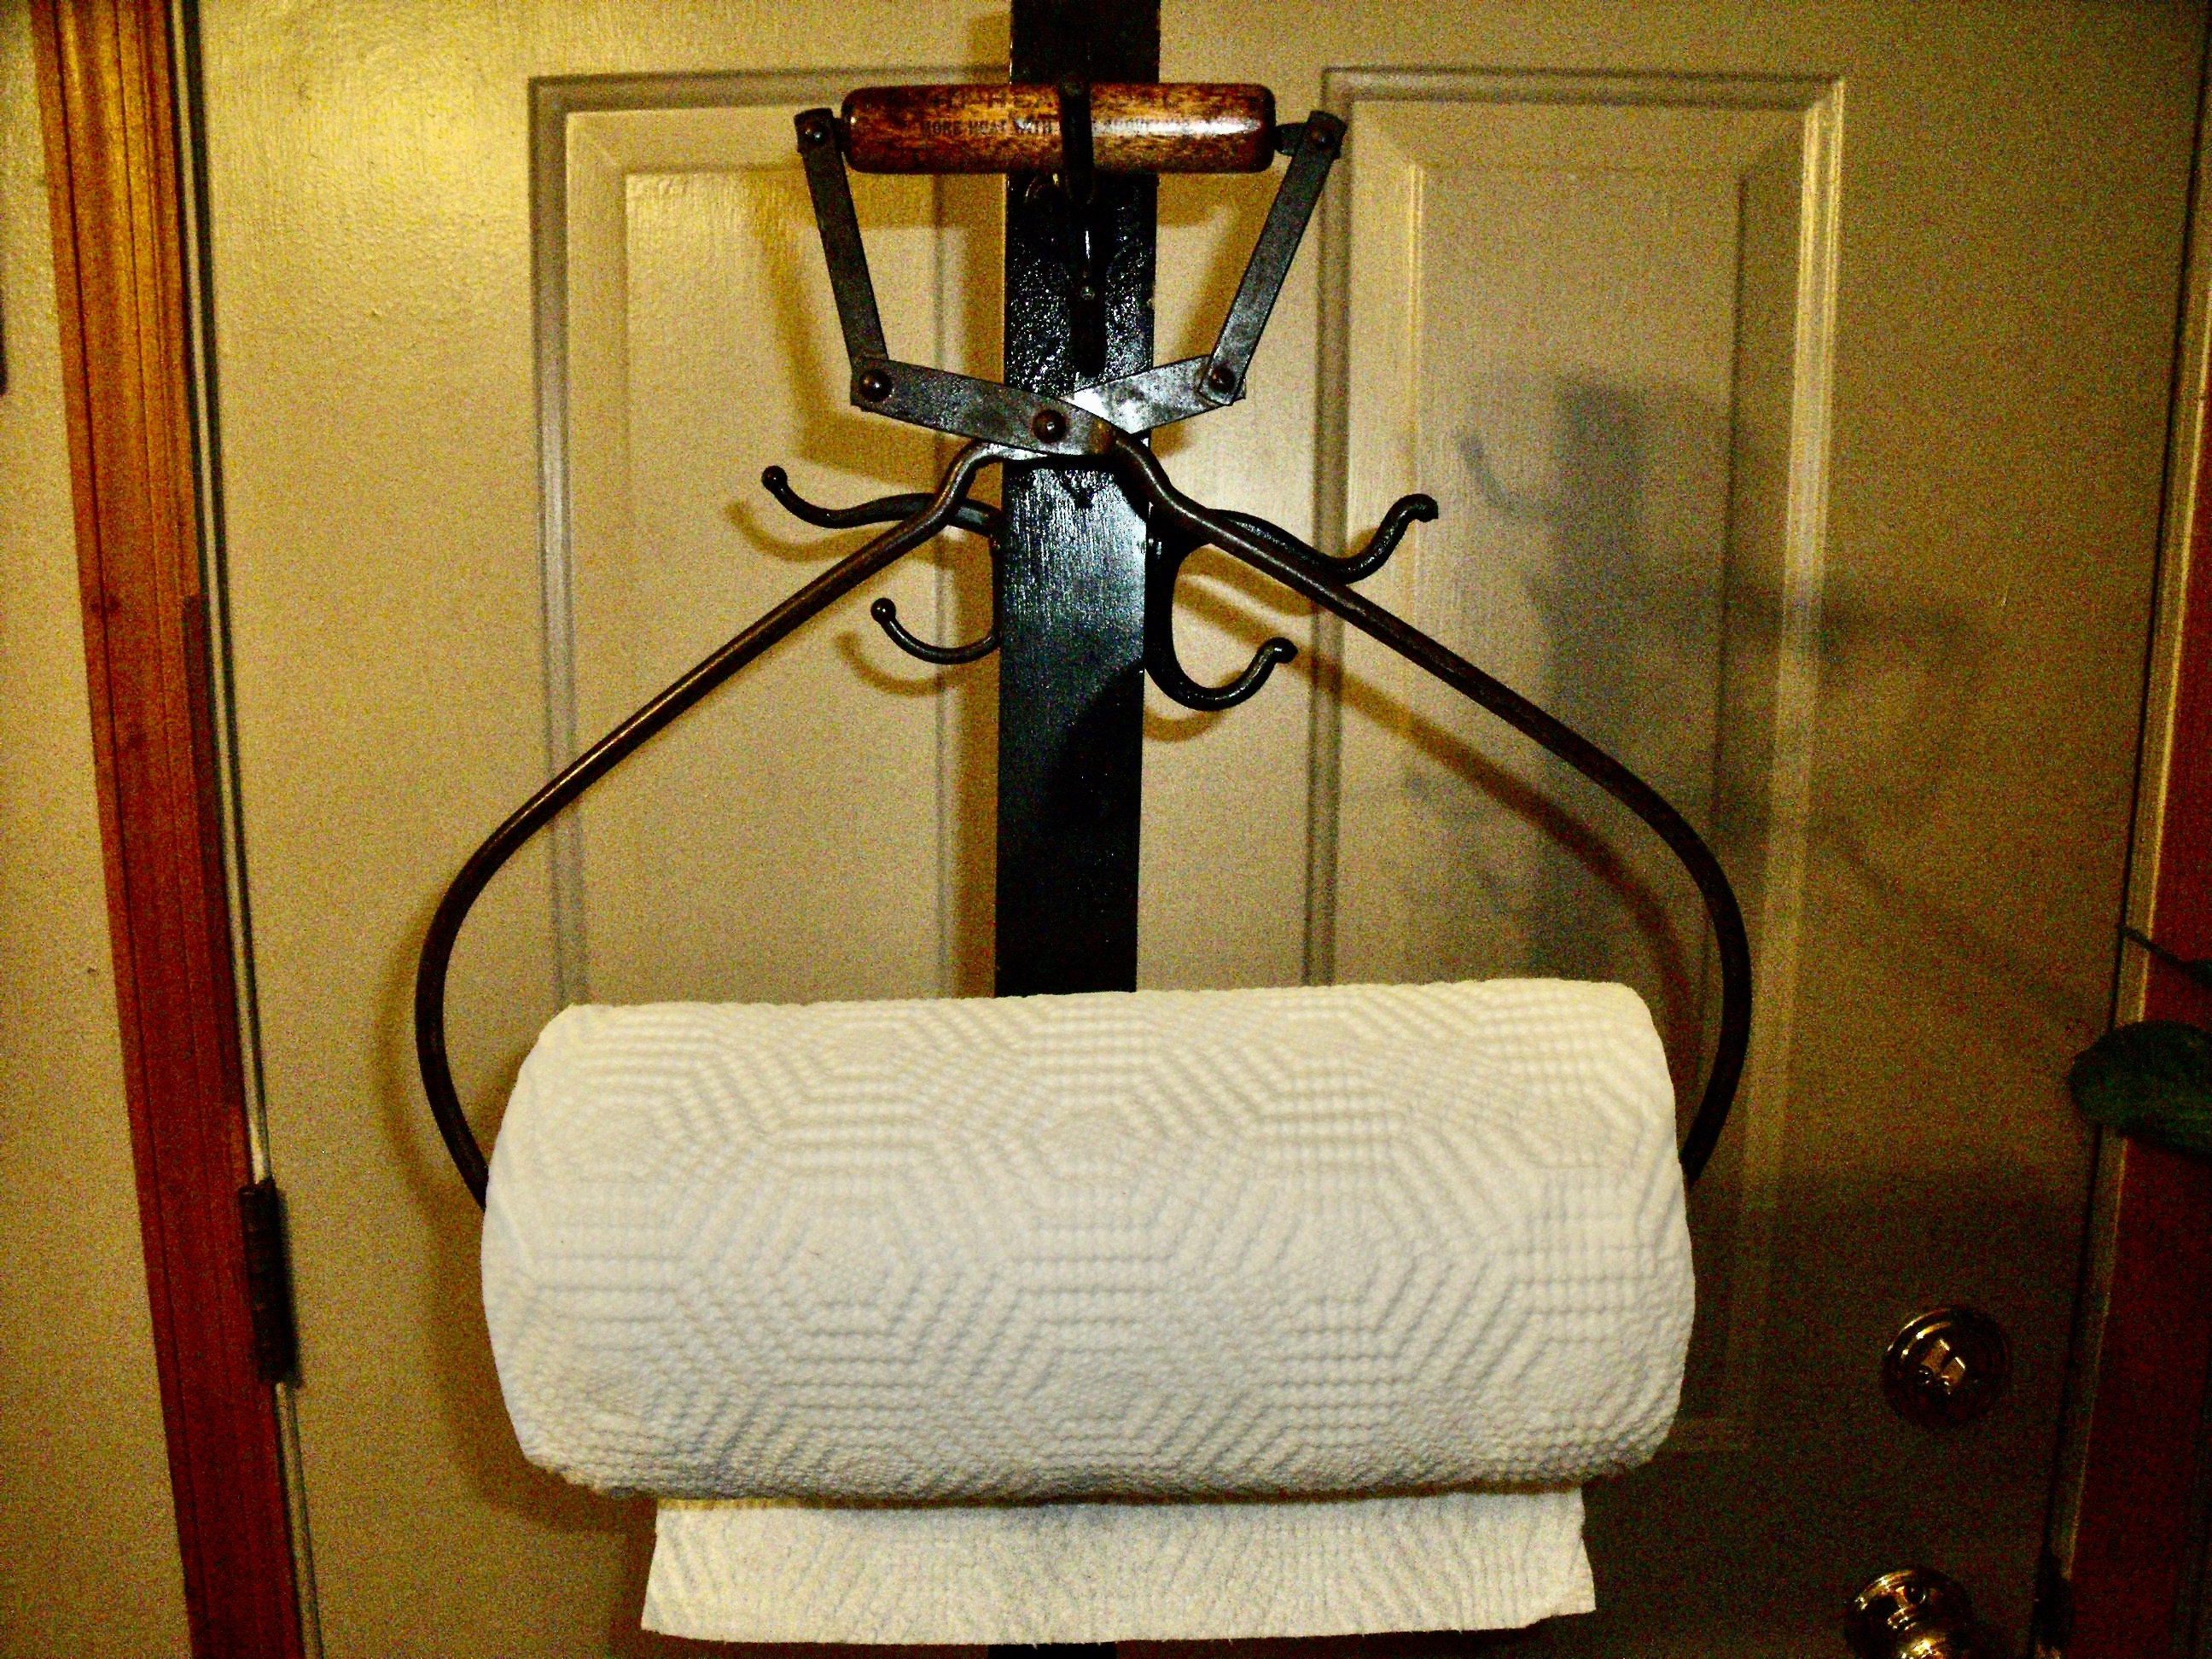 SALEICE Tongs Paper Towel Holder-recycledso Easy to Change